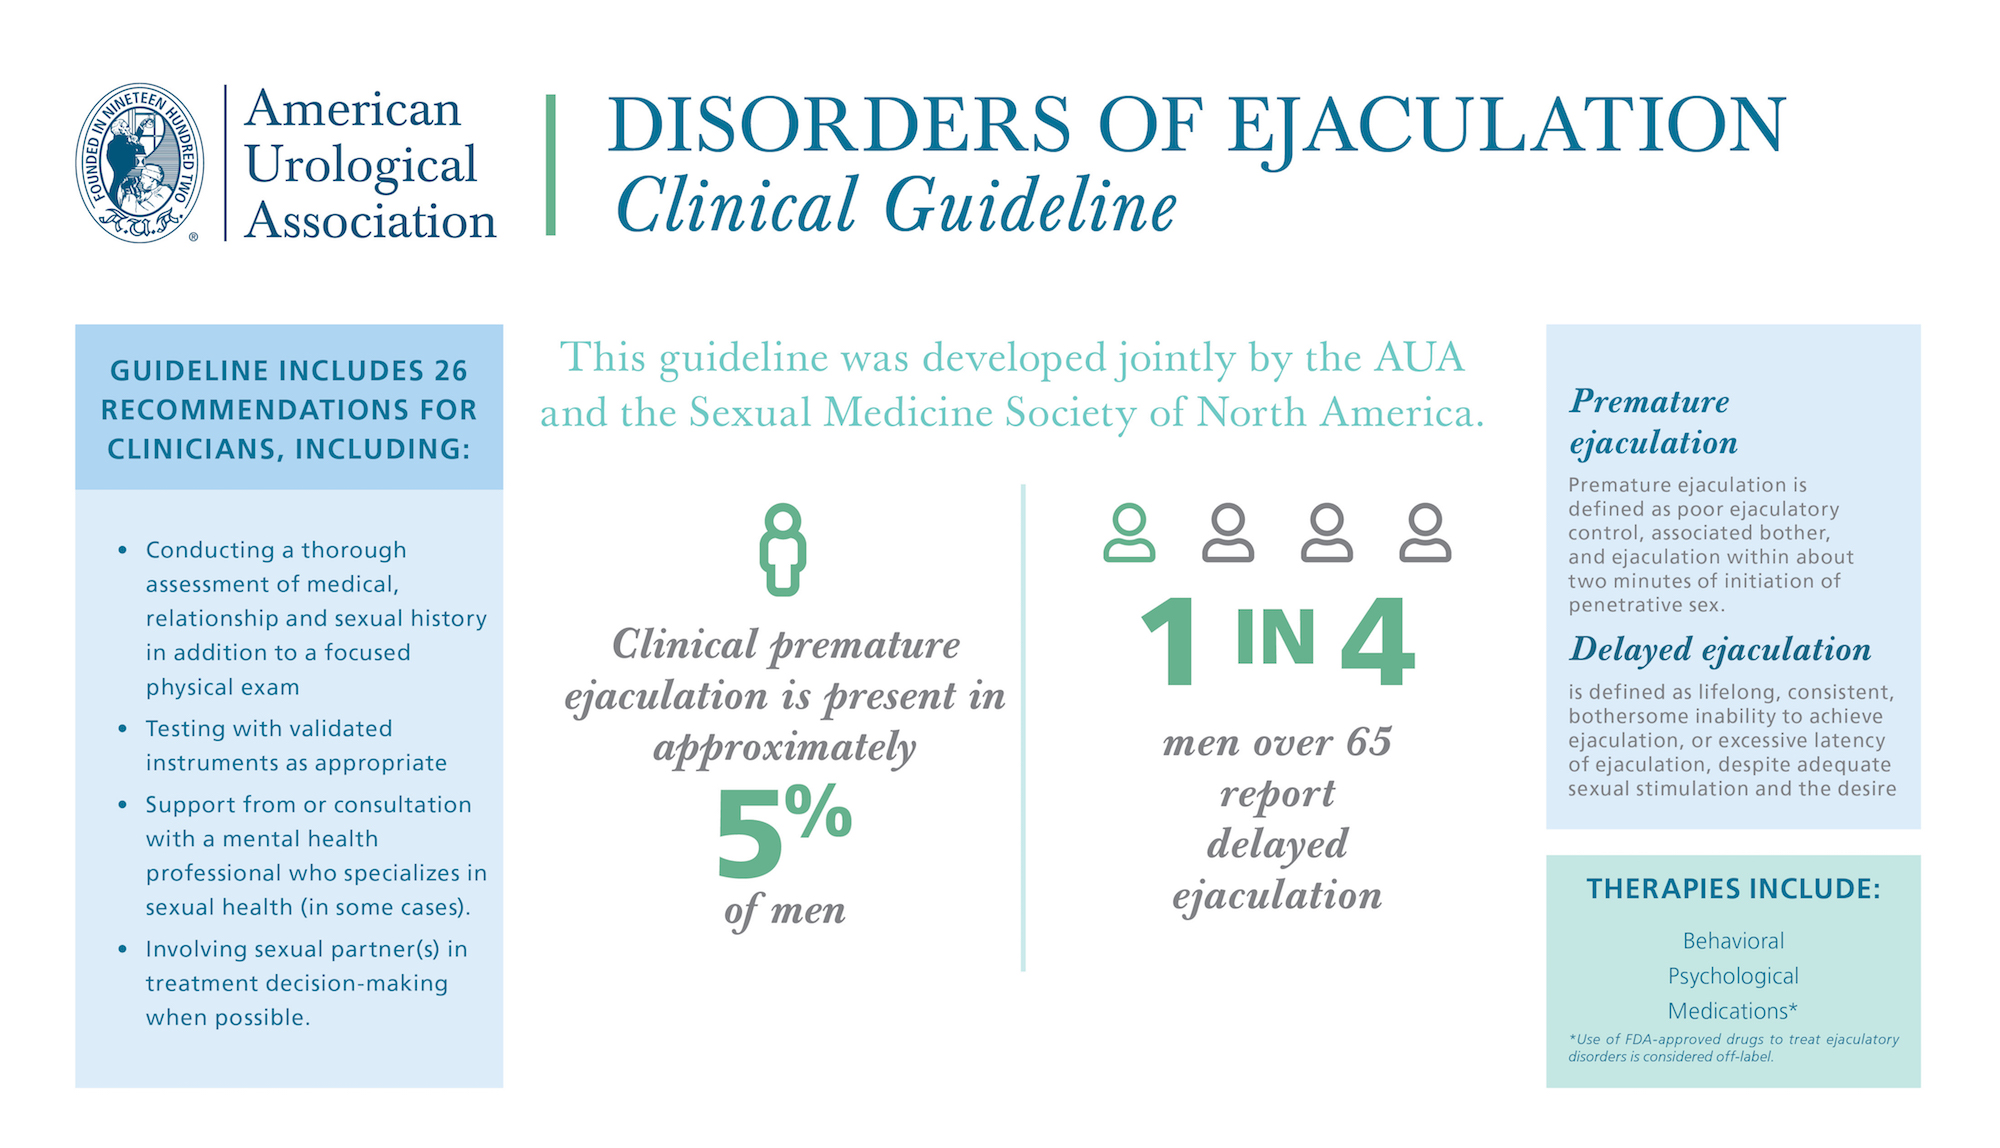 Infographic.Disorders_of_Ejaculation_Guideline.jpg